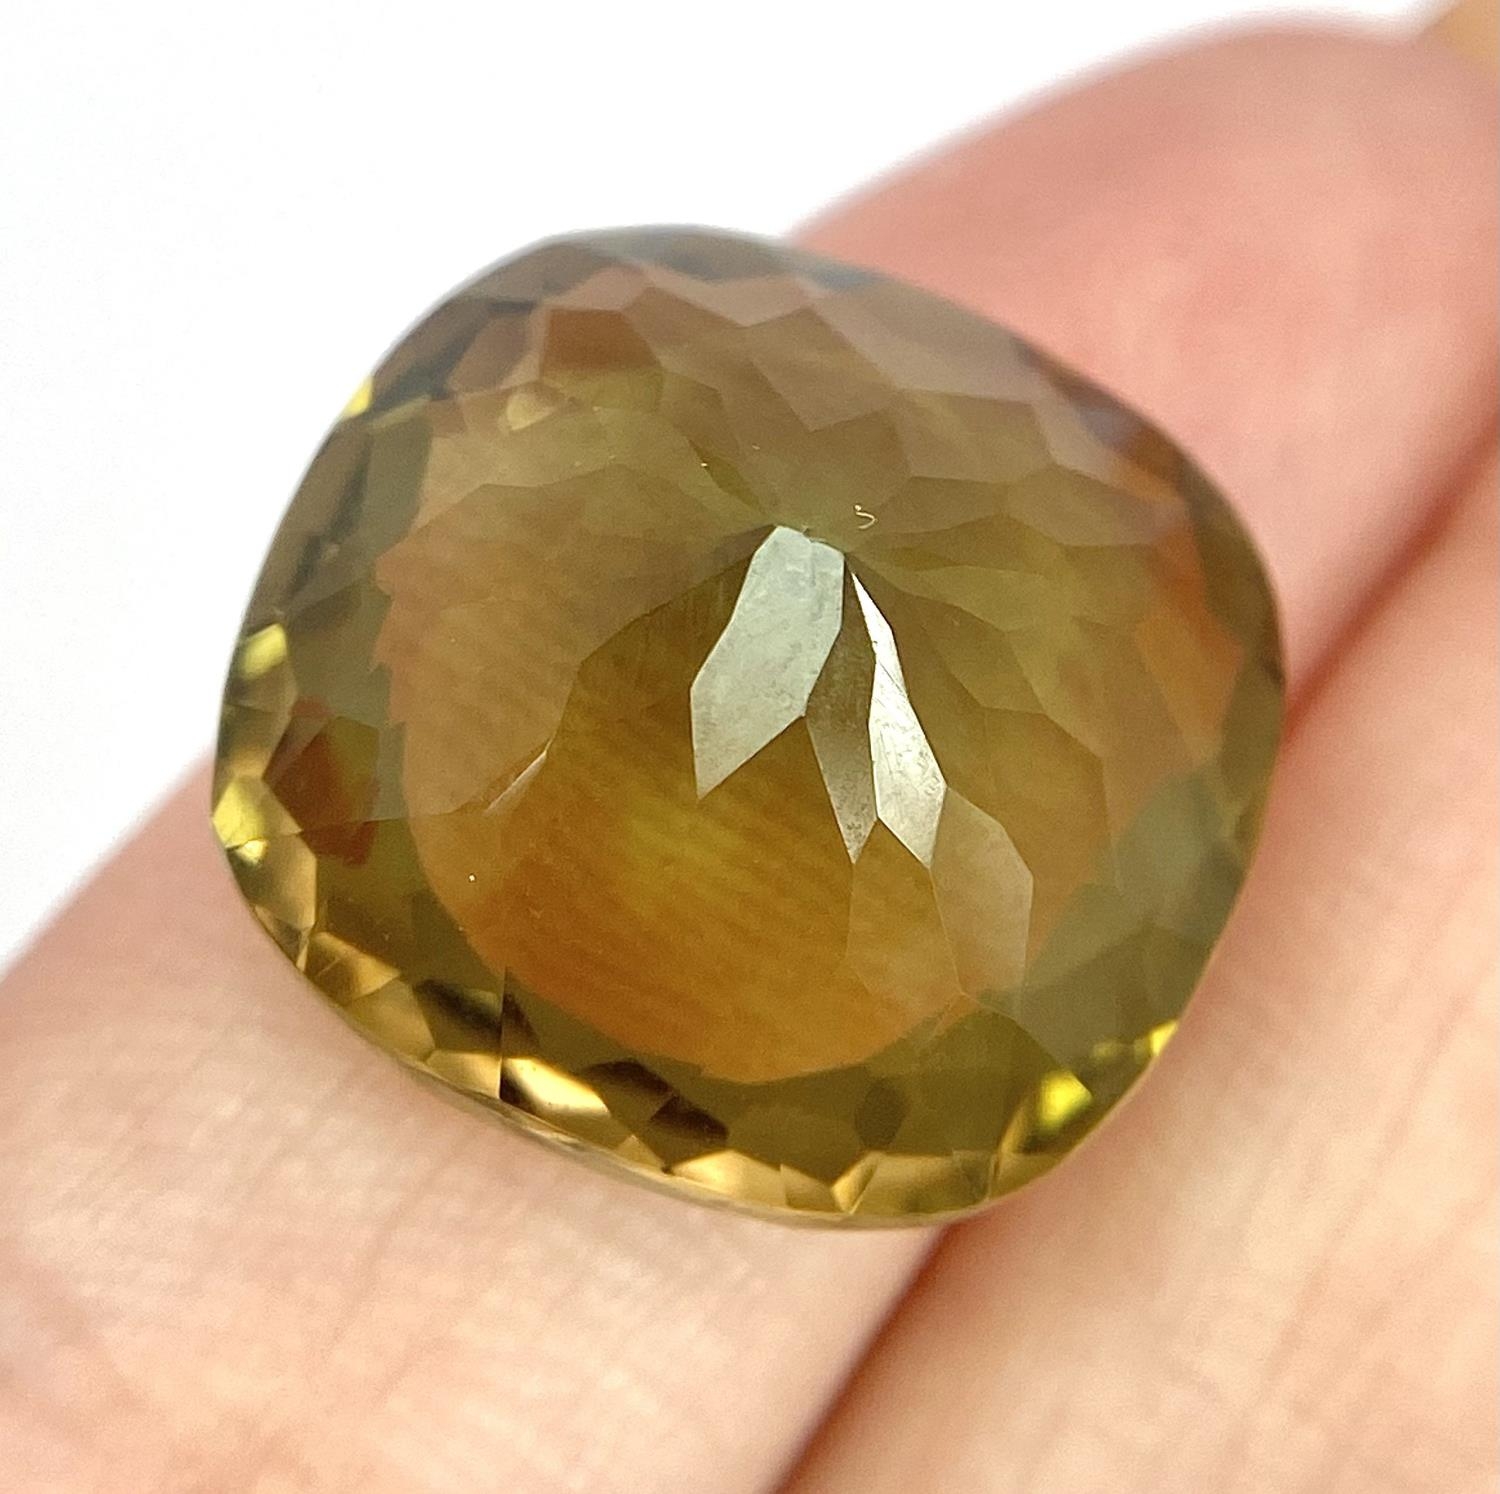 A 19ct Pale Green Prasiolite Gemstone. Cushion cut. No visible marks or inclusions. No certificate - Image 4 of 4